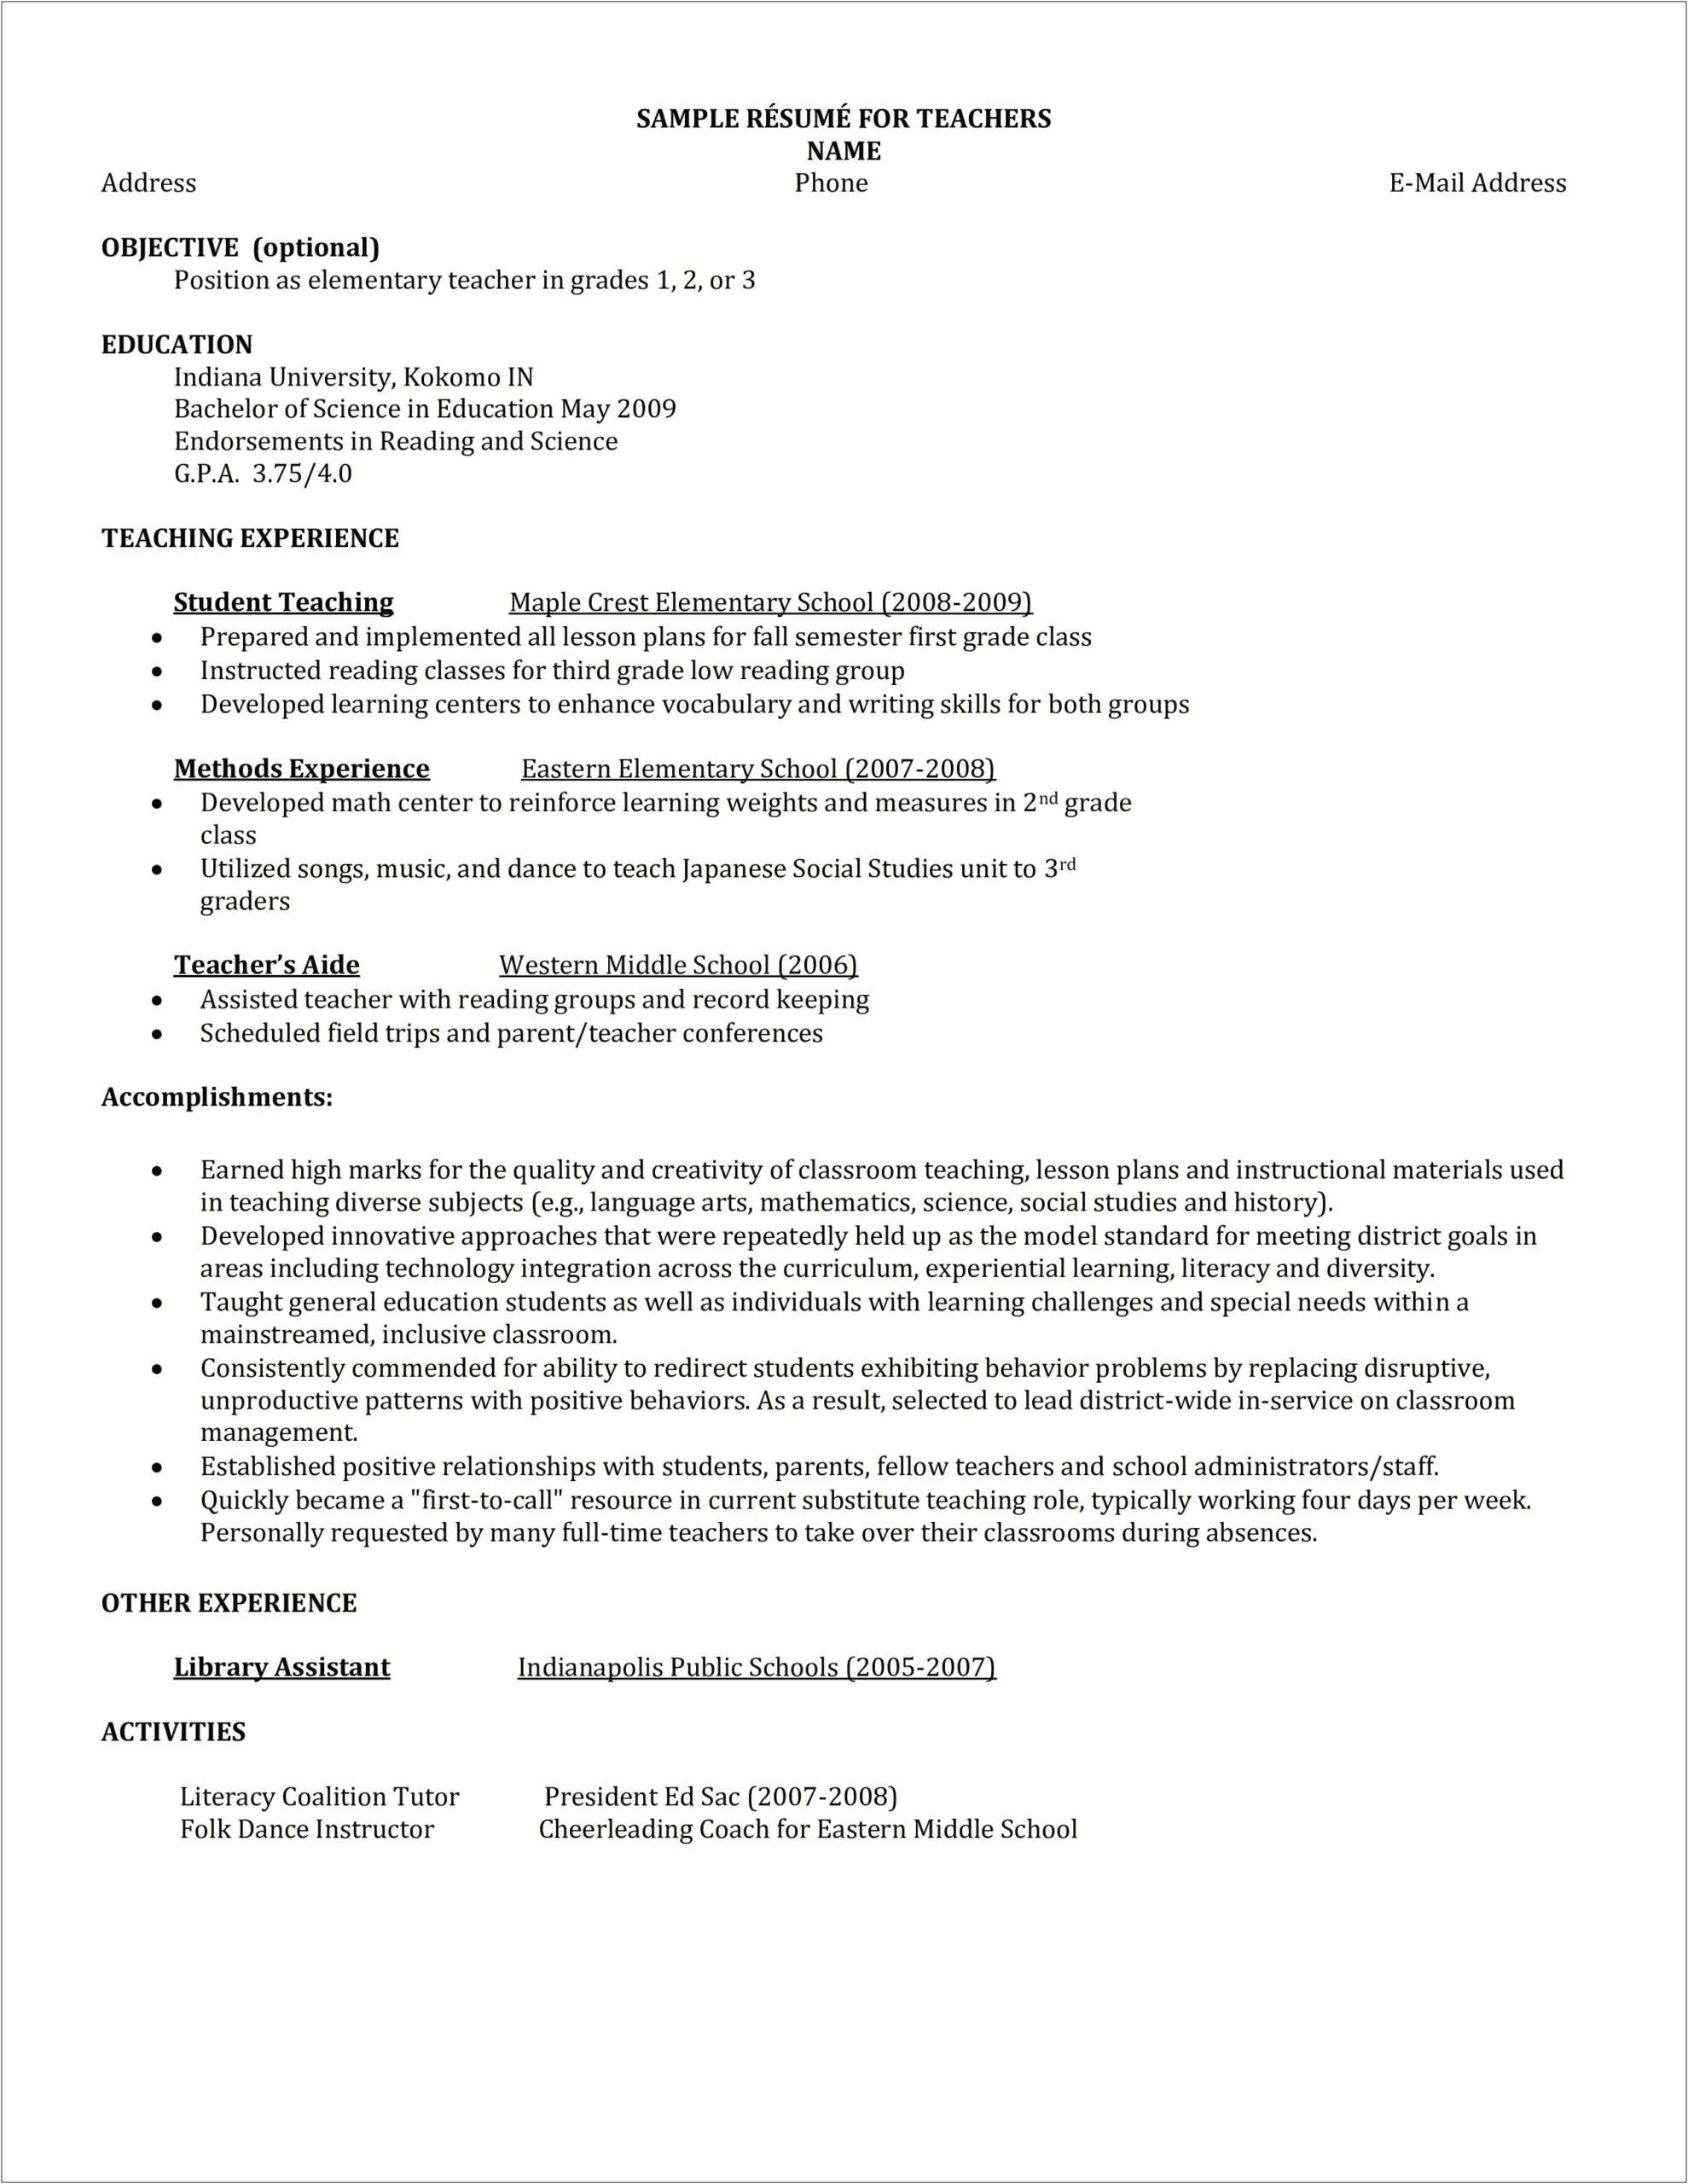 Resume Of Learning Centers Samples